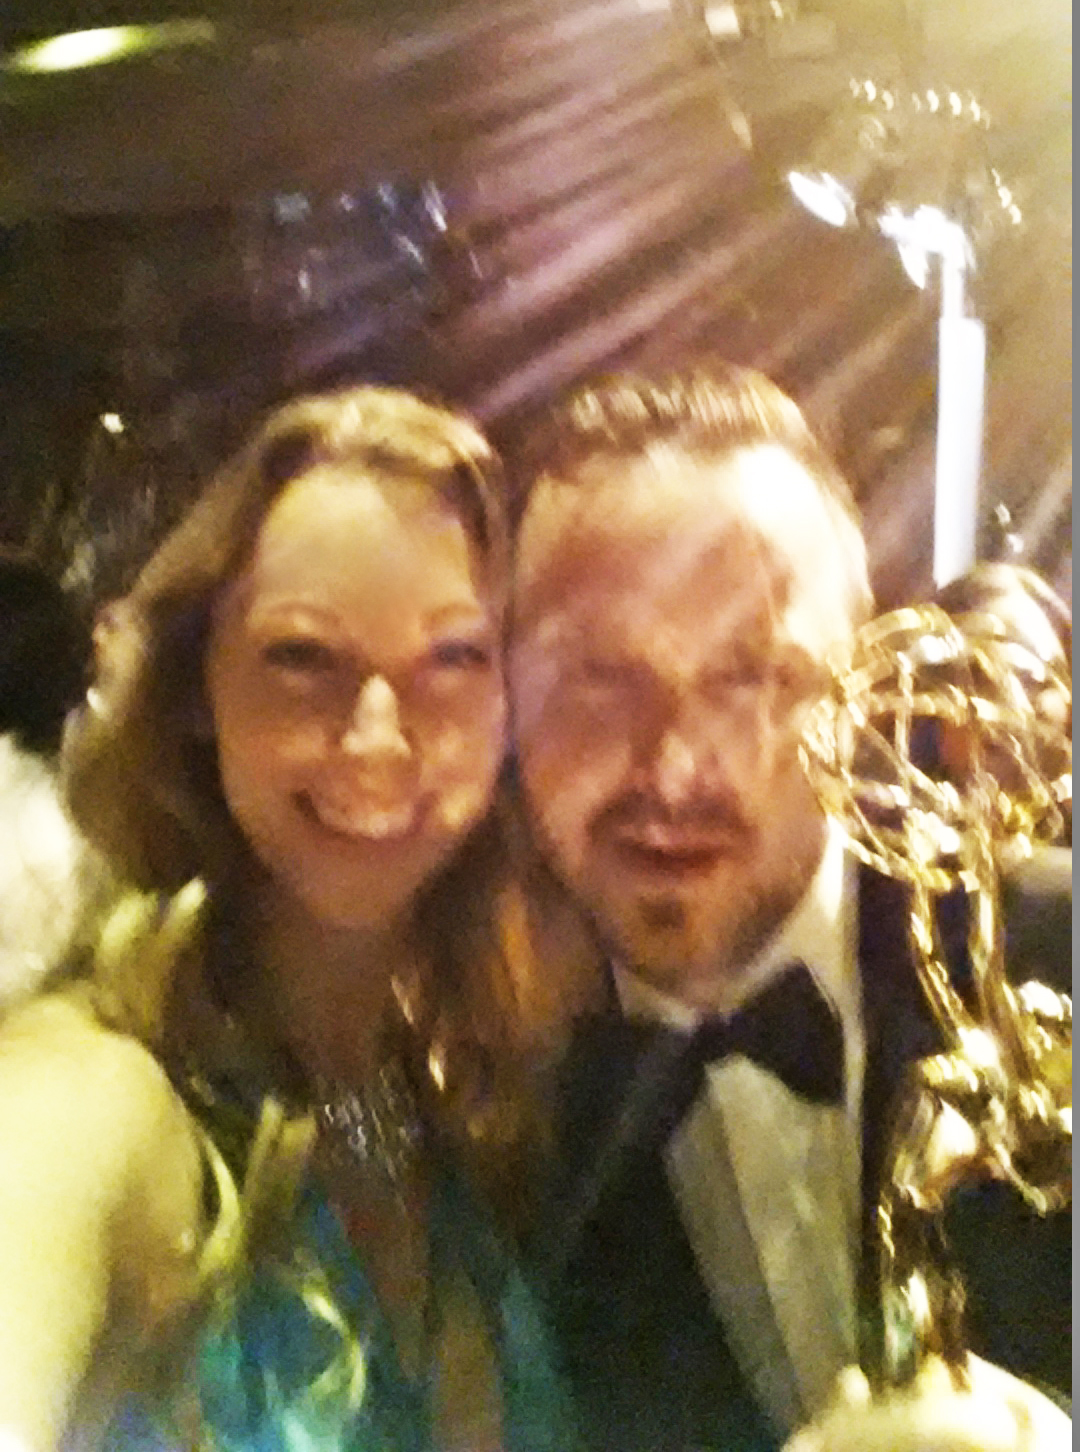 Emmy winning star Aaron Paul with Jennifer Day at the Emmys